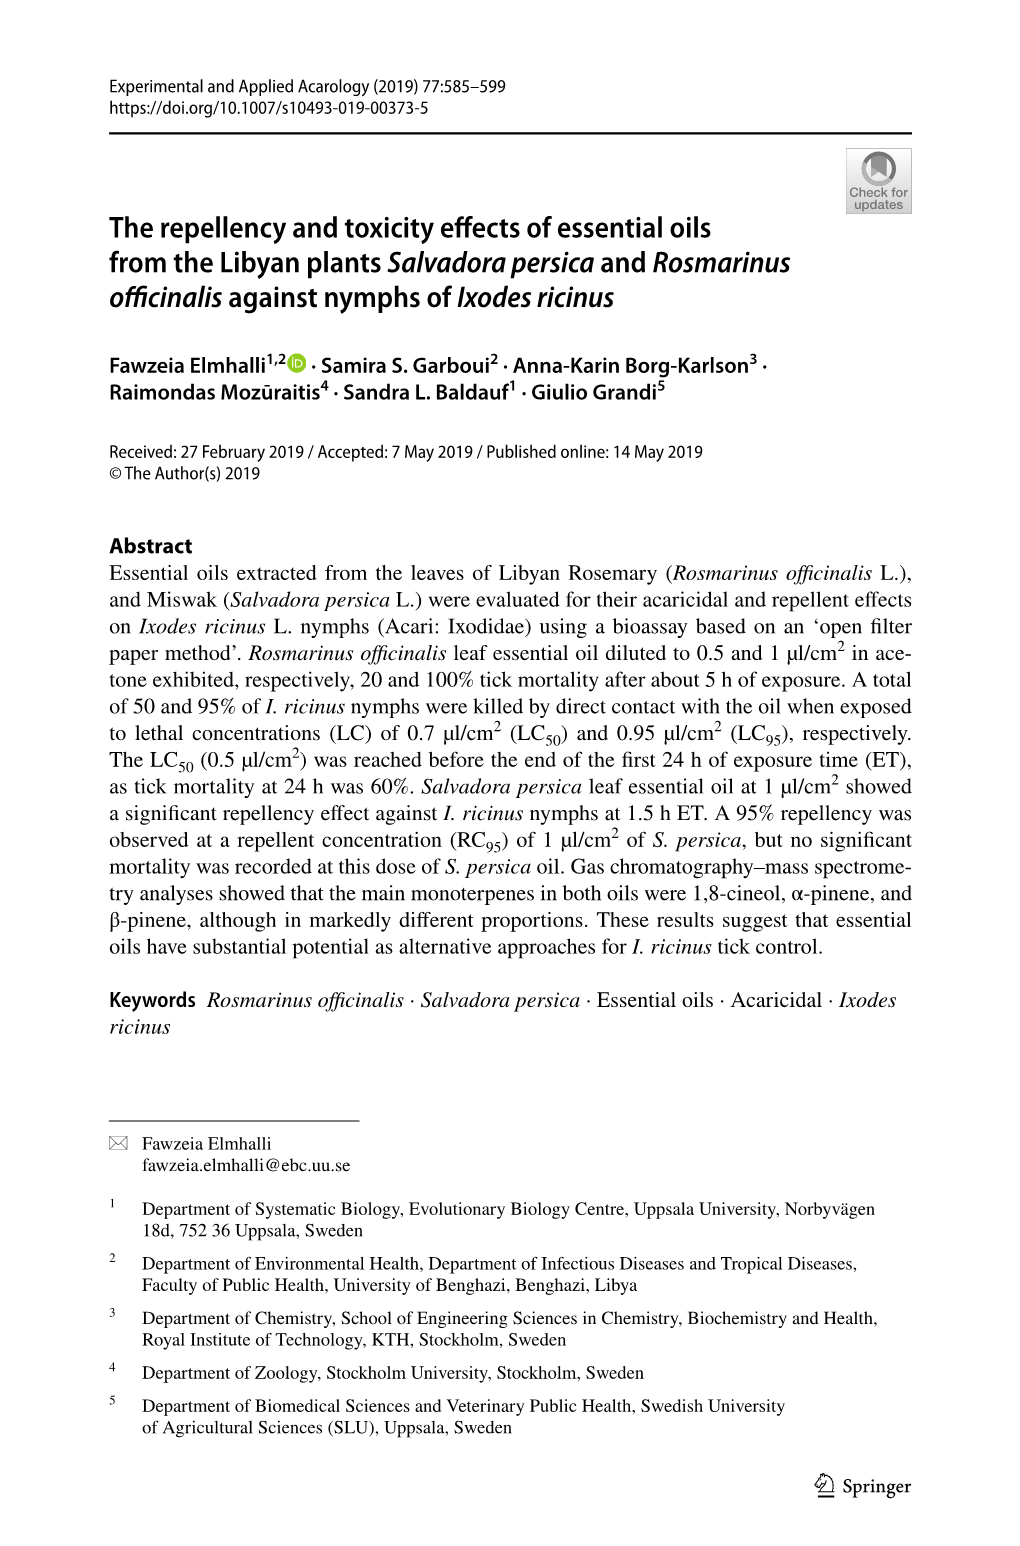 The Repellency and Toxicity Effects of Essential Oils from the Libyan Plants Salvadora Persica and Rosmarinus Officinalis Agains